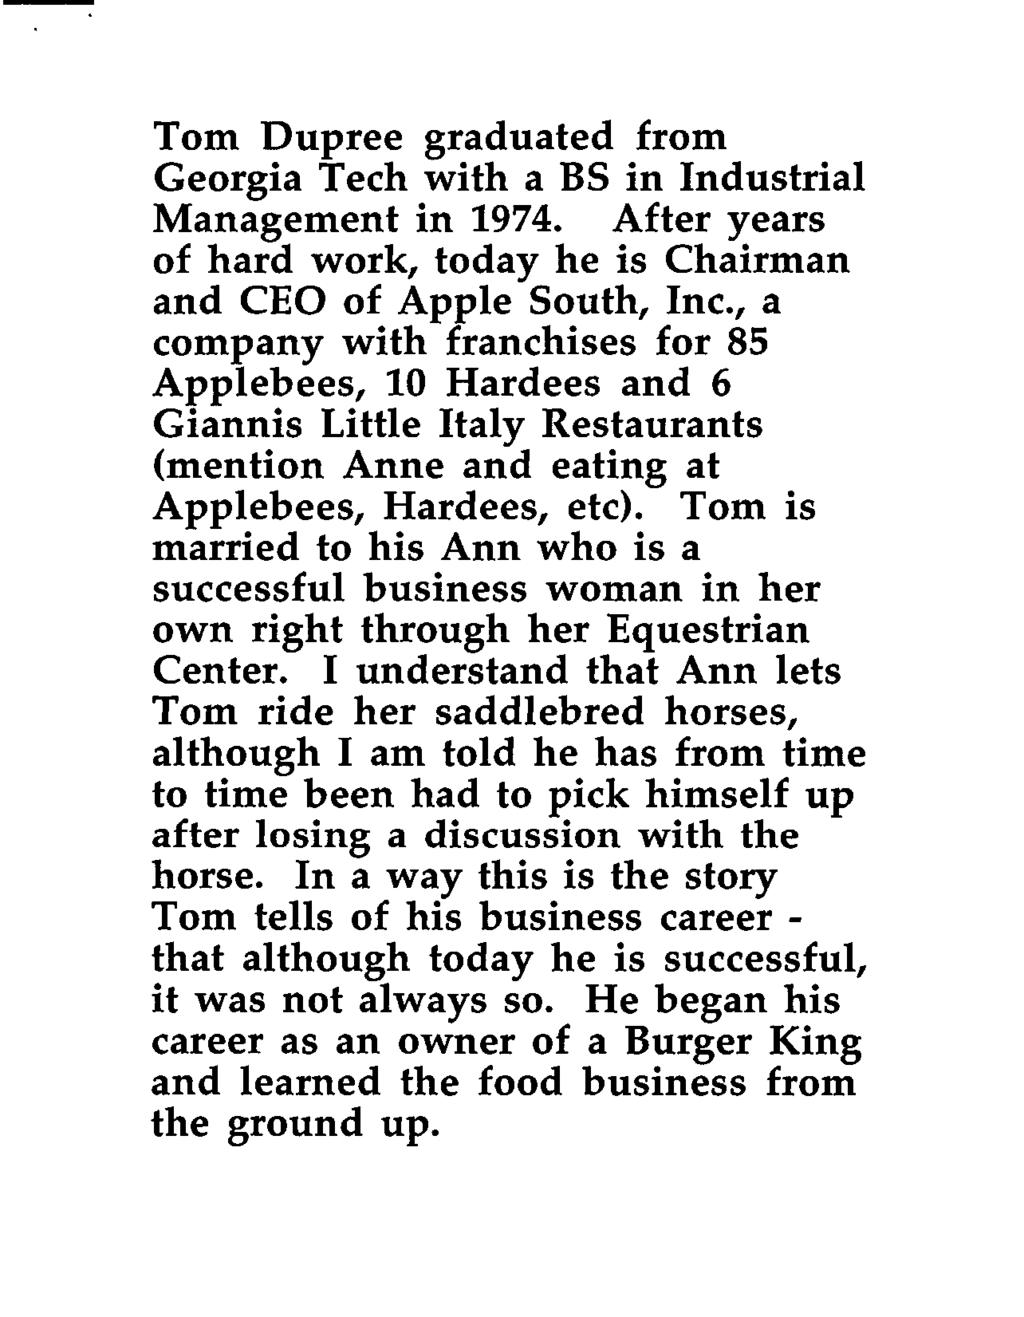 Tom Dupree graduated from Georgia Tech with a BS in Industrial Management in 1974. After years of hard work, today he is Chairman and CEO of Apple South, Inc.